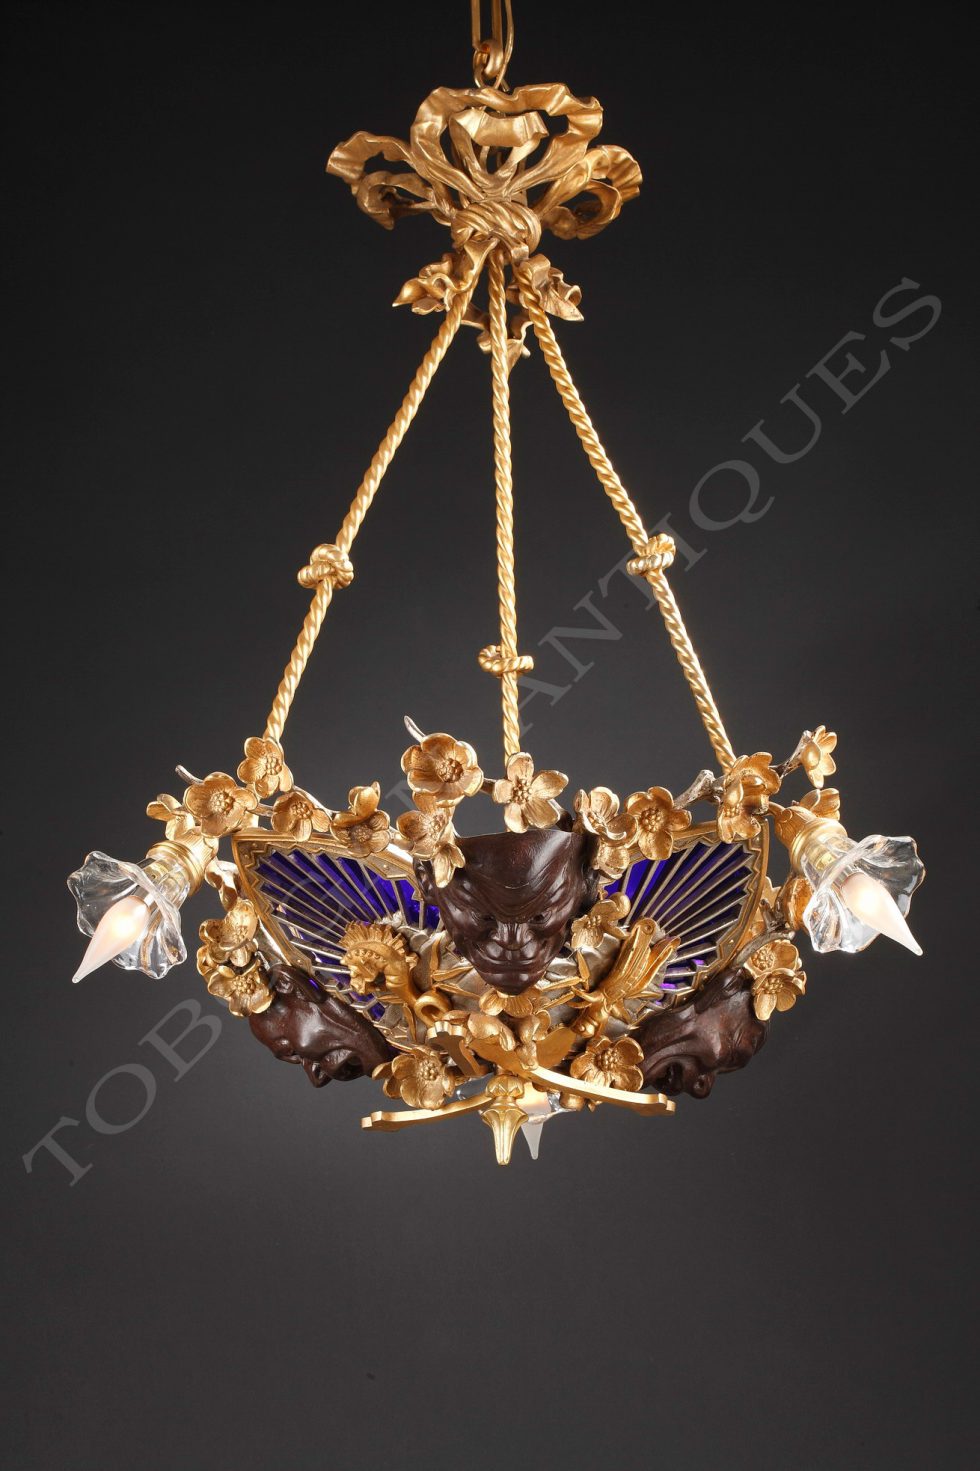 E. Soleau <br/> Japanese style Chandelier